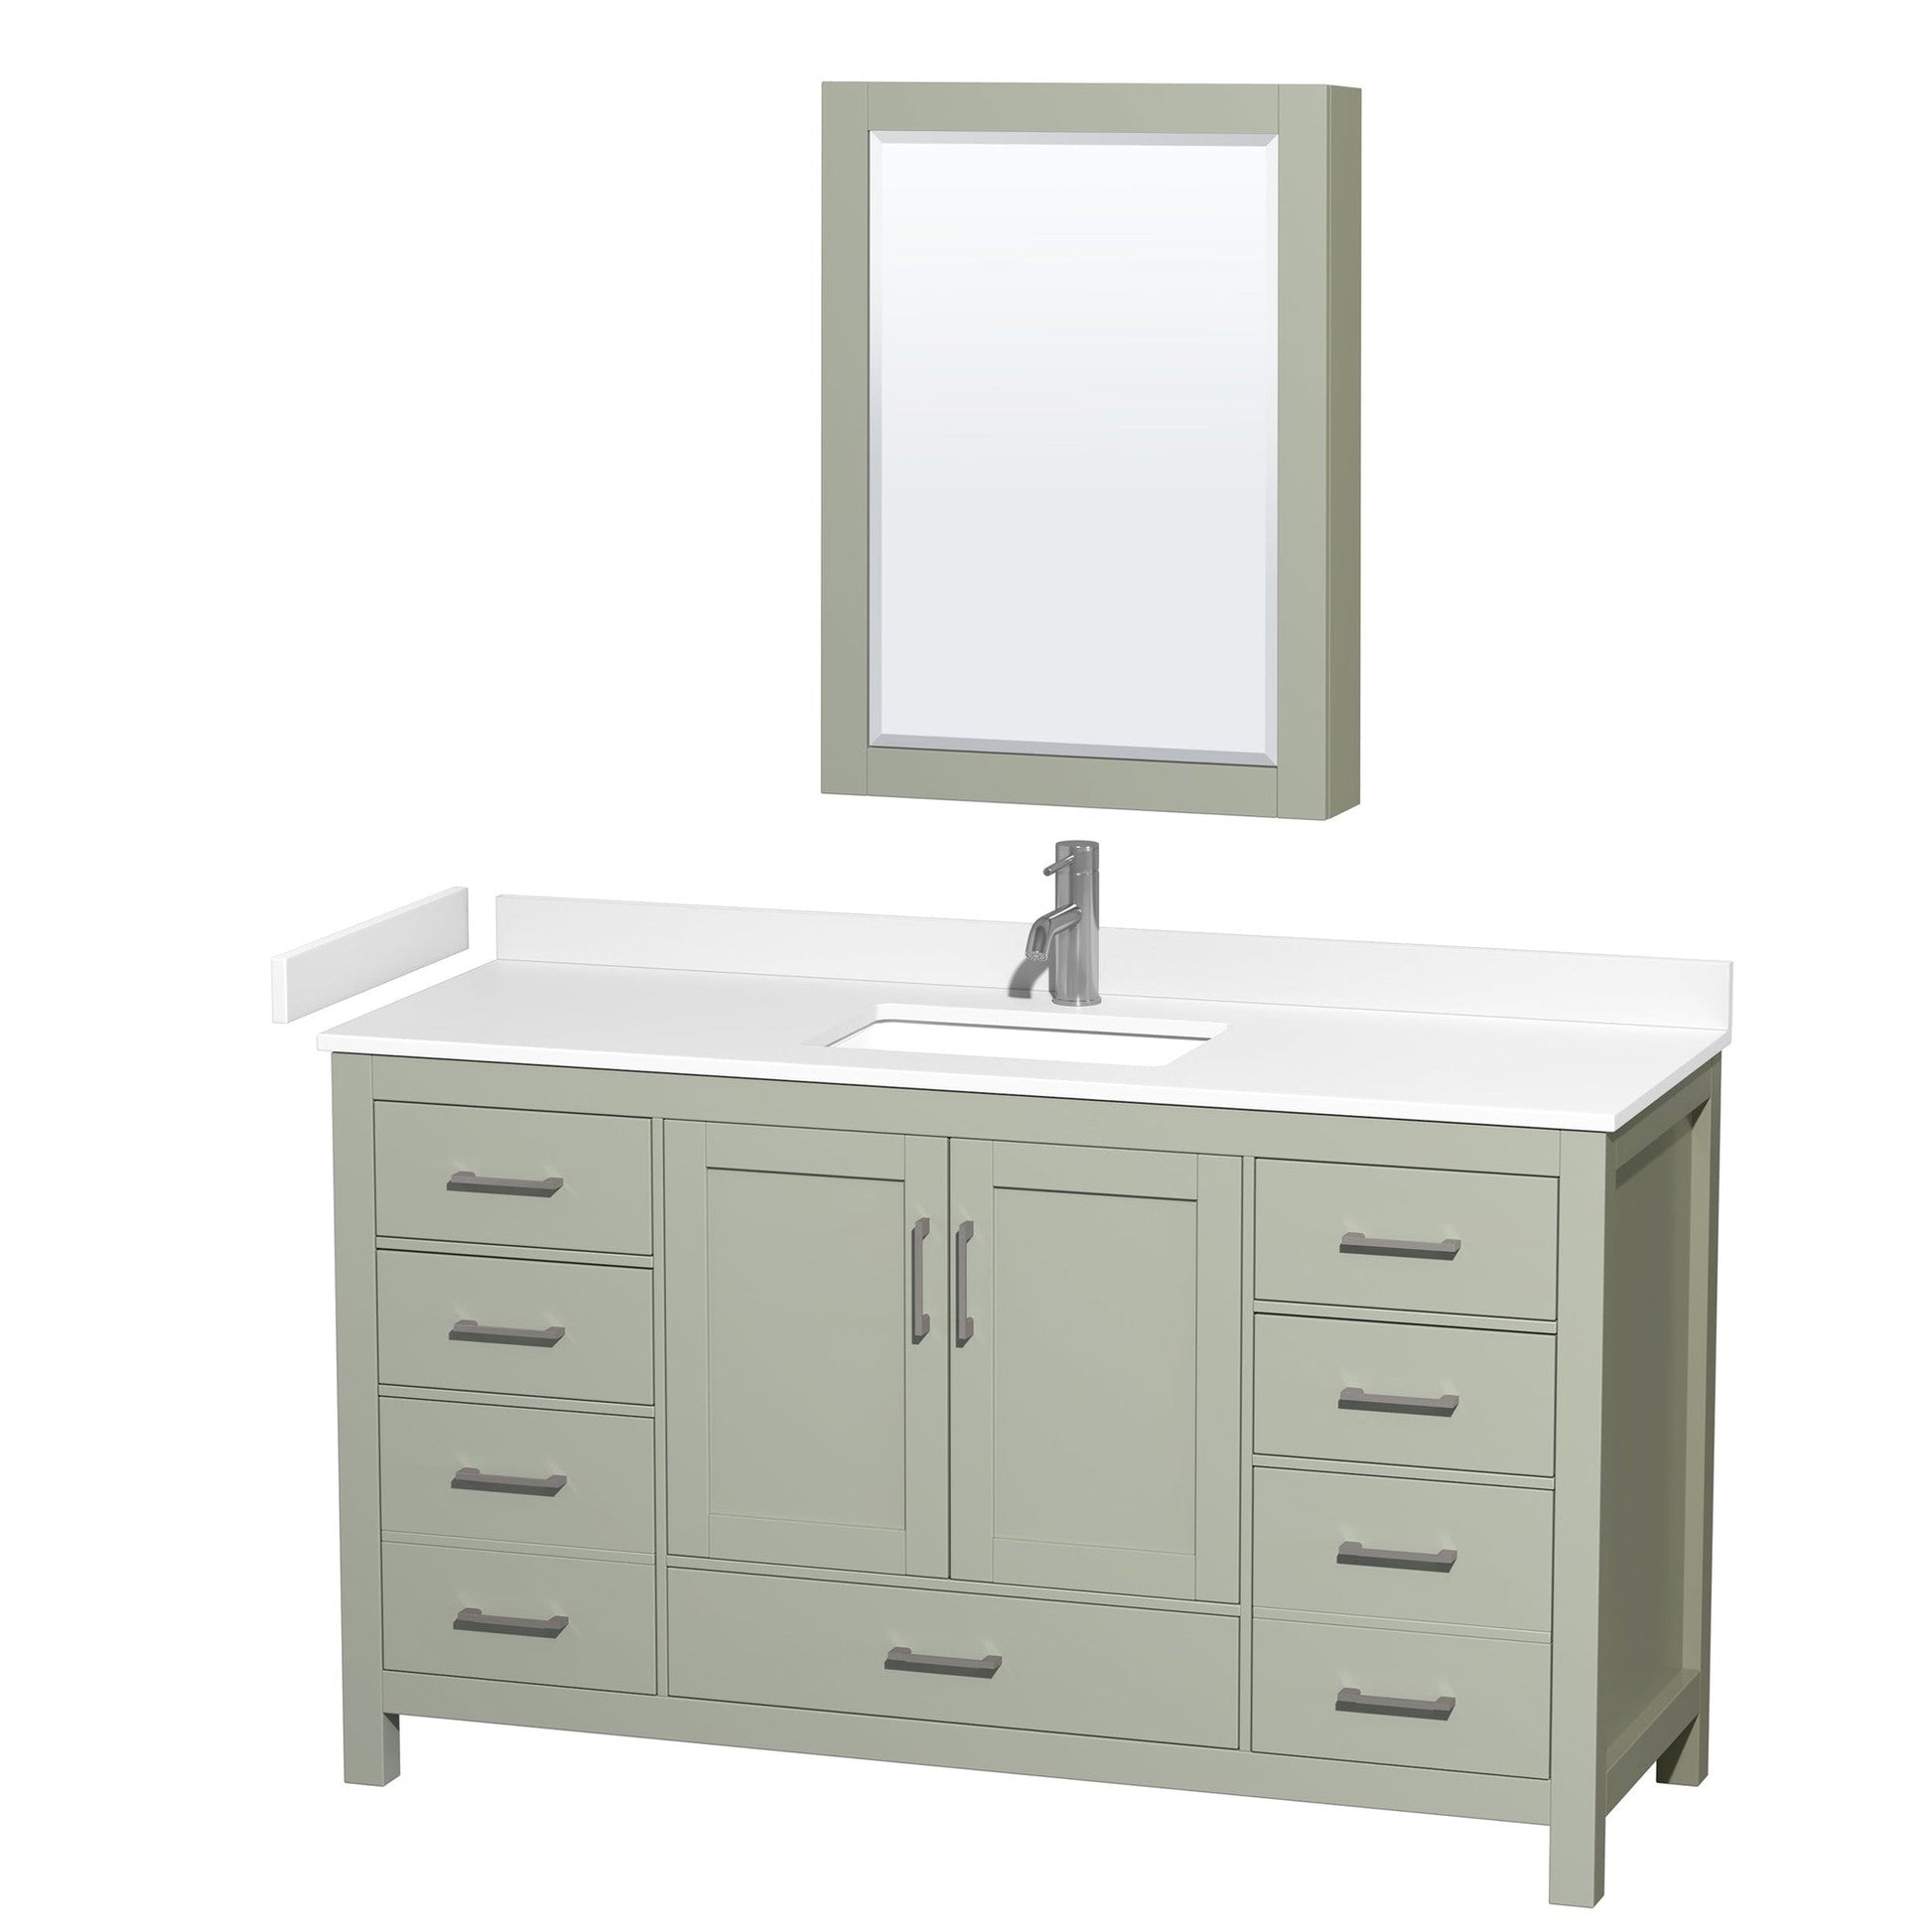 Sheffield 60" Single Bathroom Vanity in Light Green, White Cultured Marble Countertop, Undermount Square Sink, Brushed Nickel Trim, Medicine Cabinet